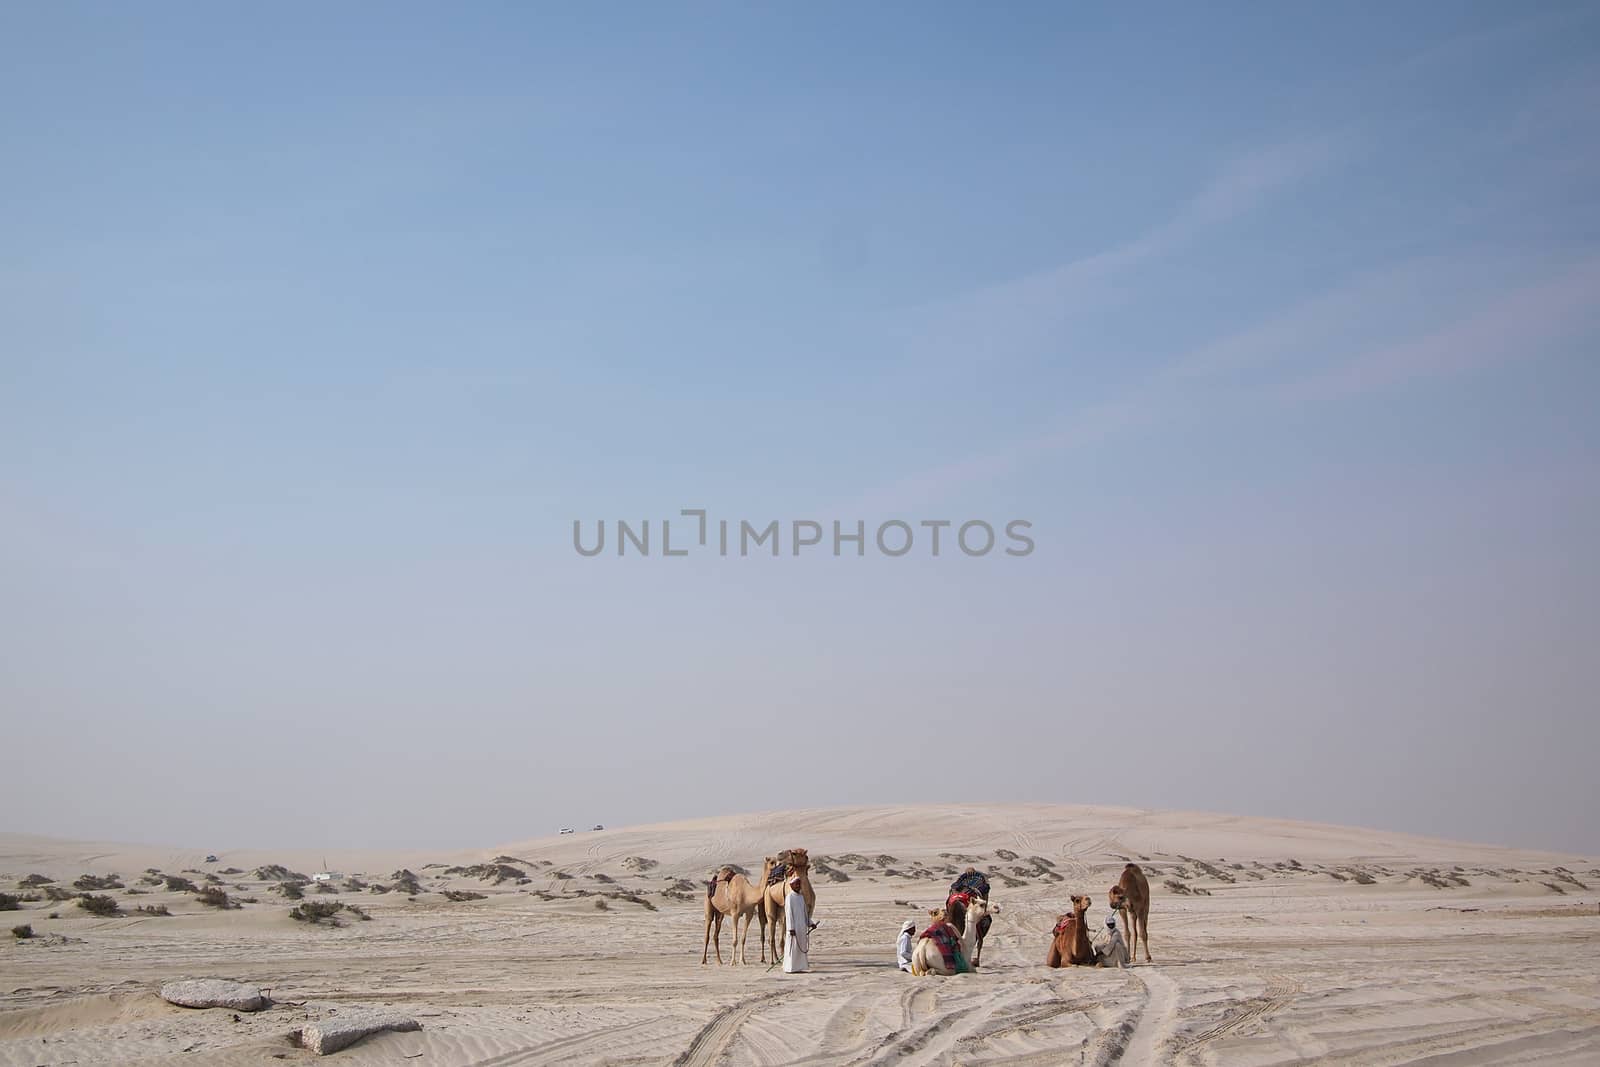 A group bedouin with dromedaries in the sand of the Arabian desert in the Arabian Gulf state Qatar.